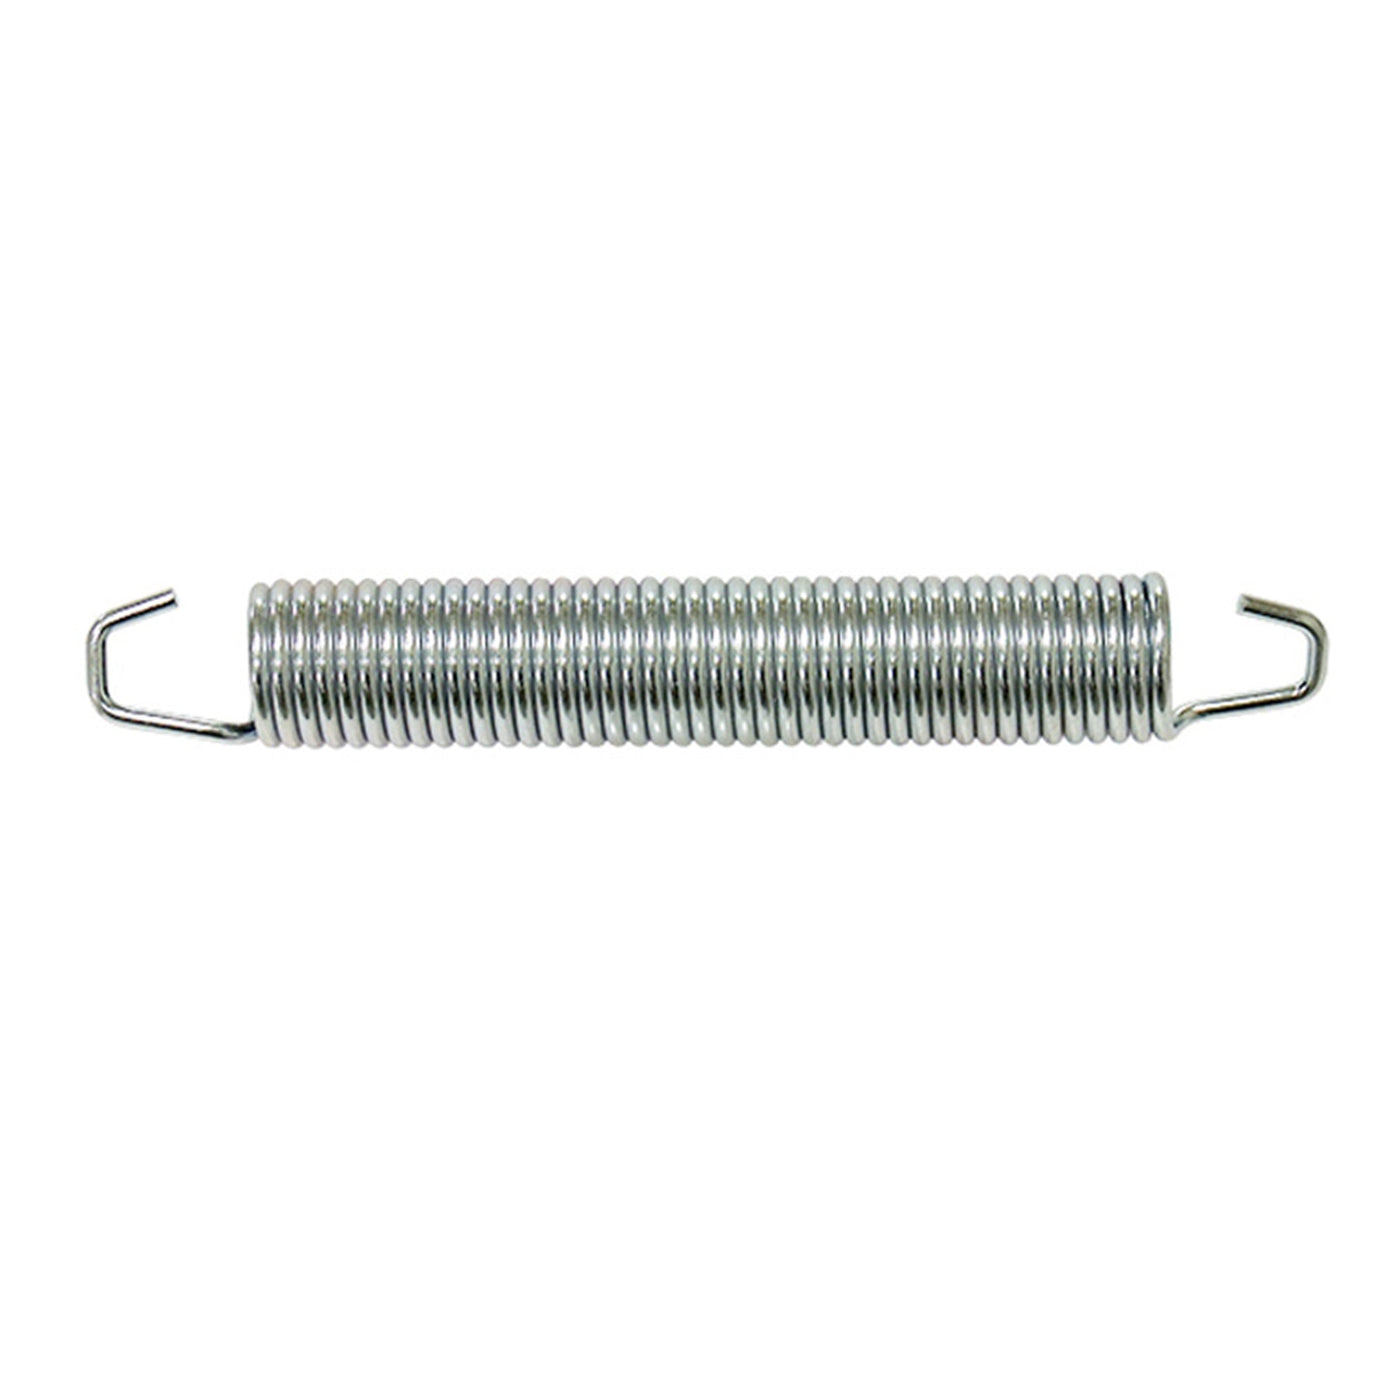 Kimpex 02-107-03 Exhaust Spring #02-107-03